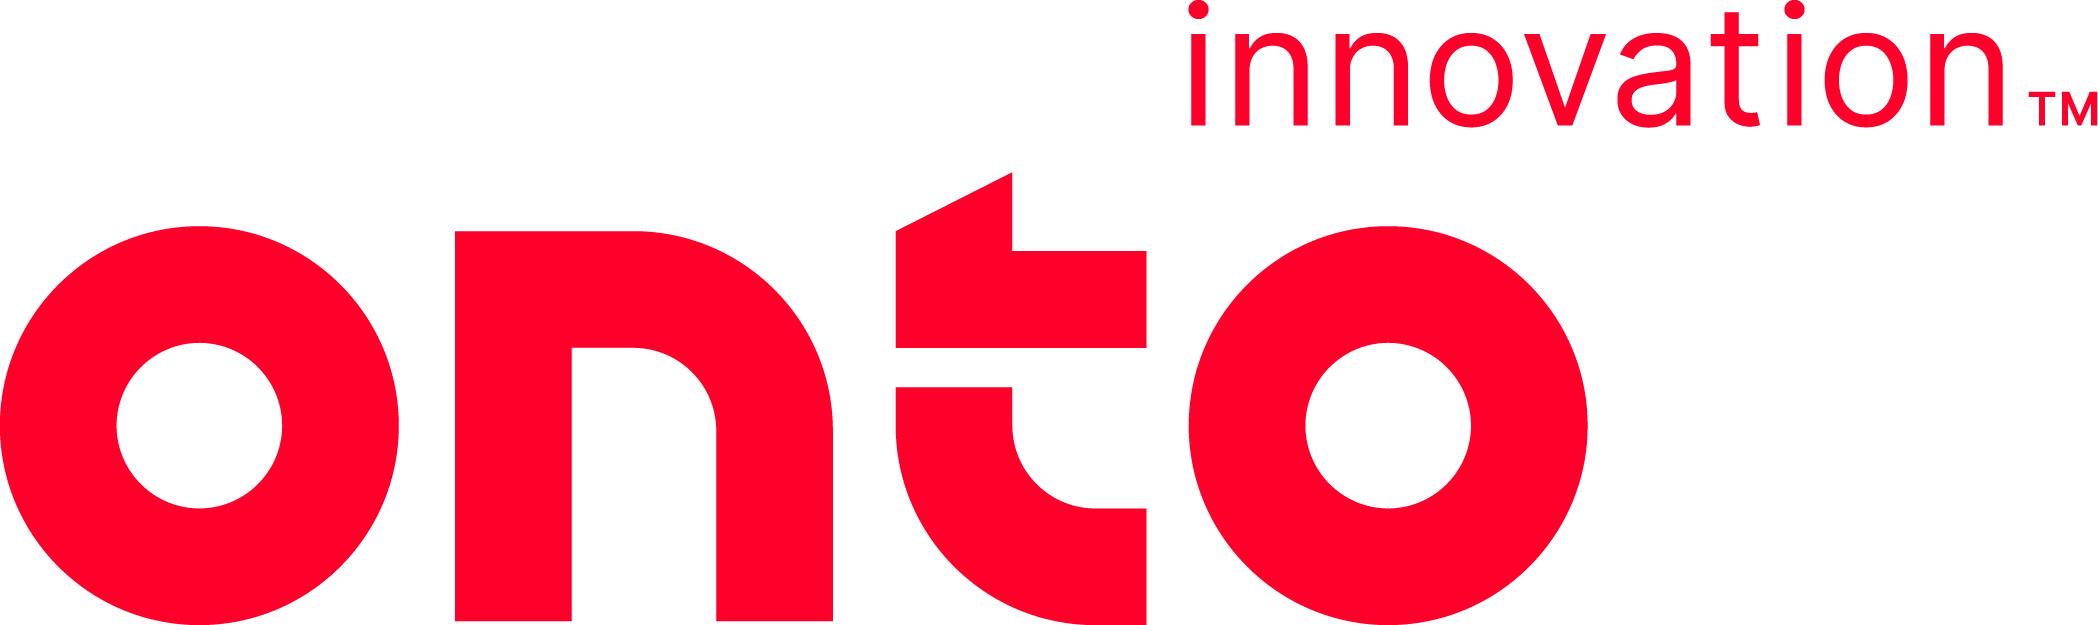 Onto_Innovation_Red_logo (1).png